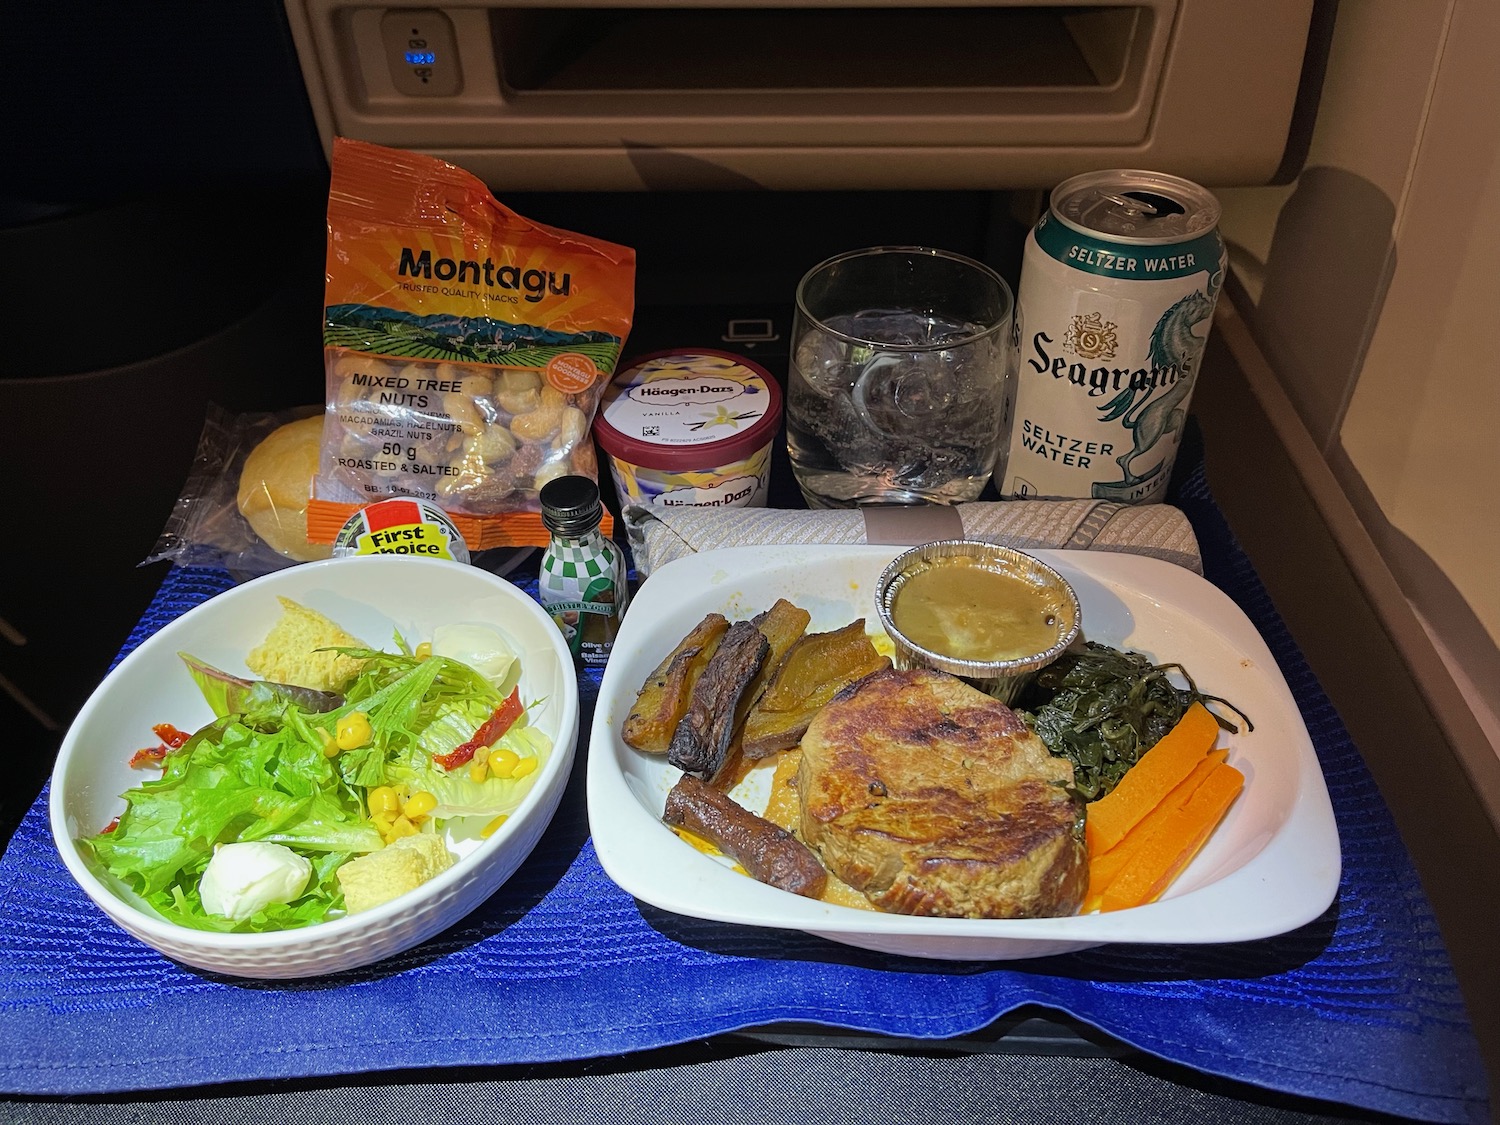 food on a tray in the back of a plane